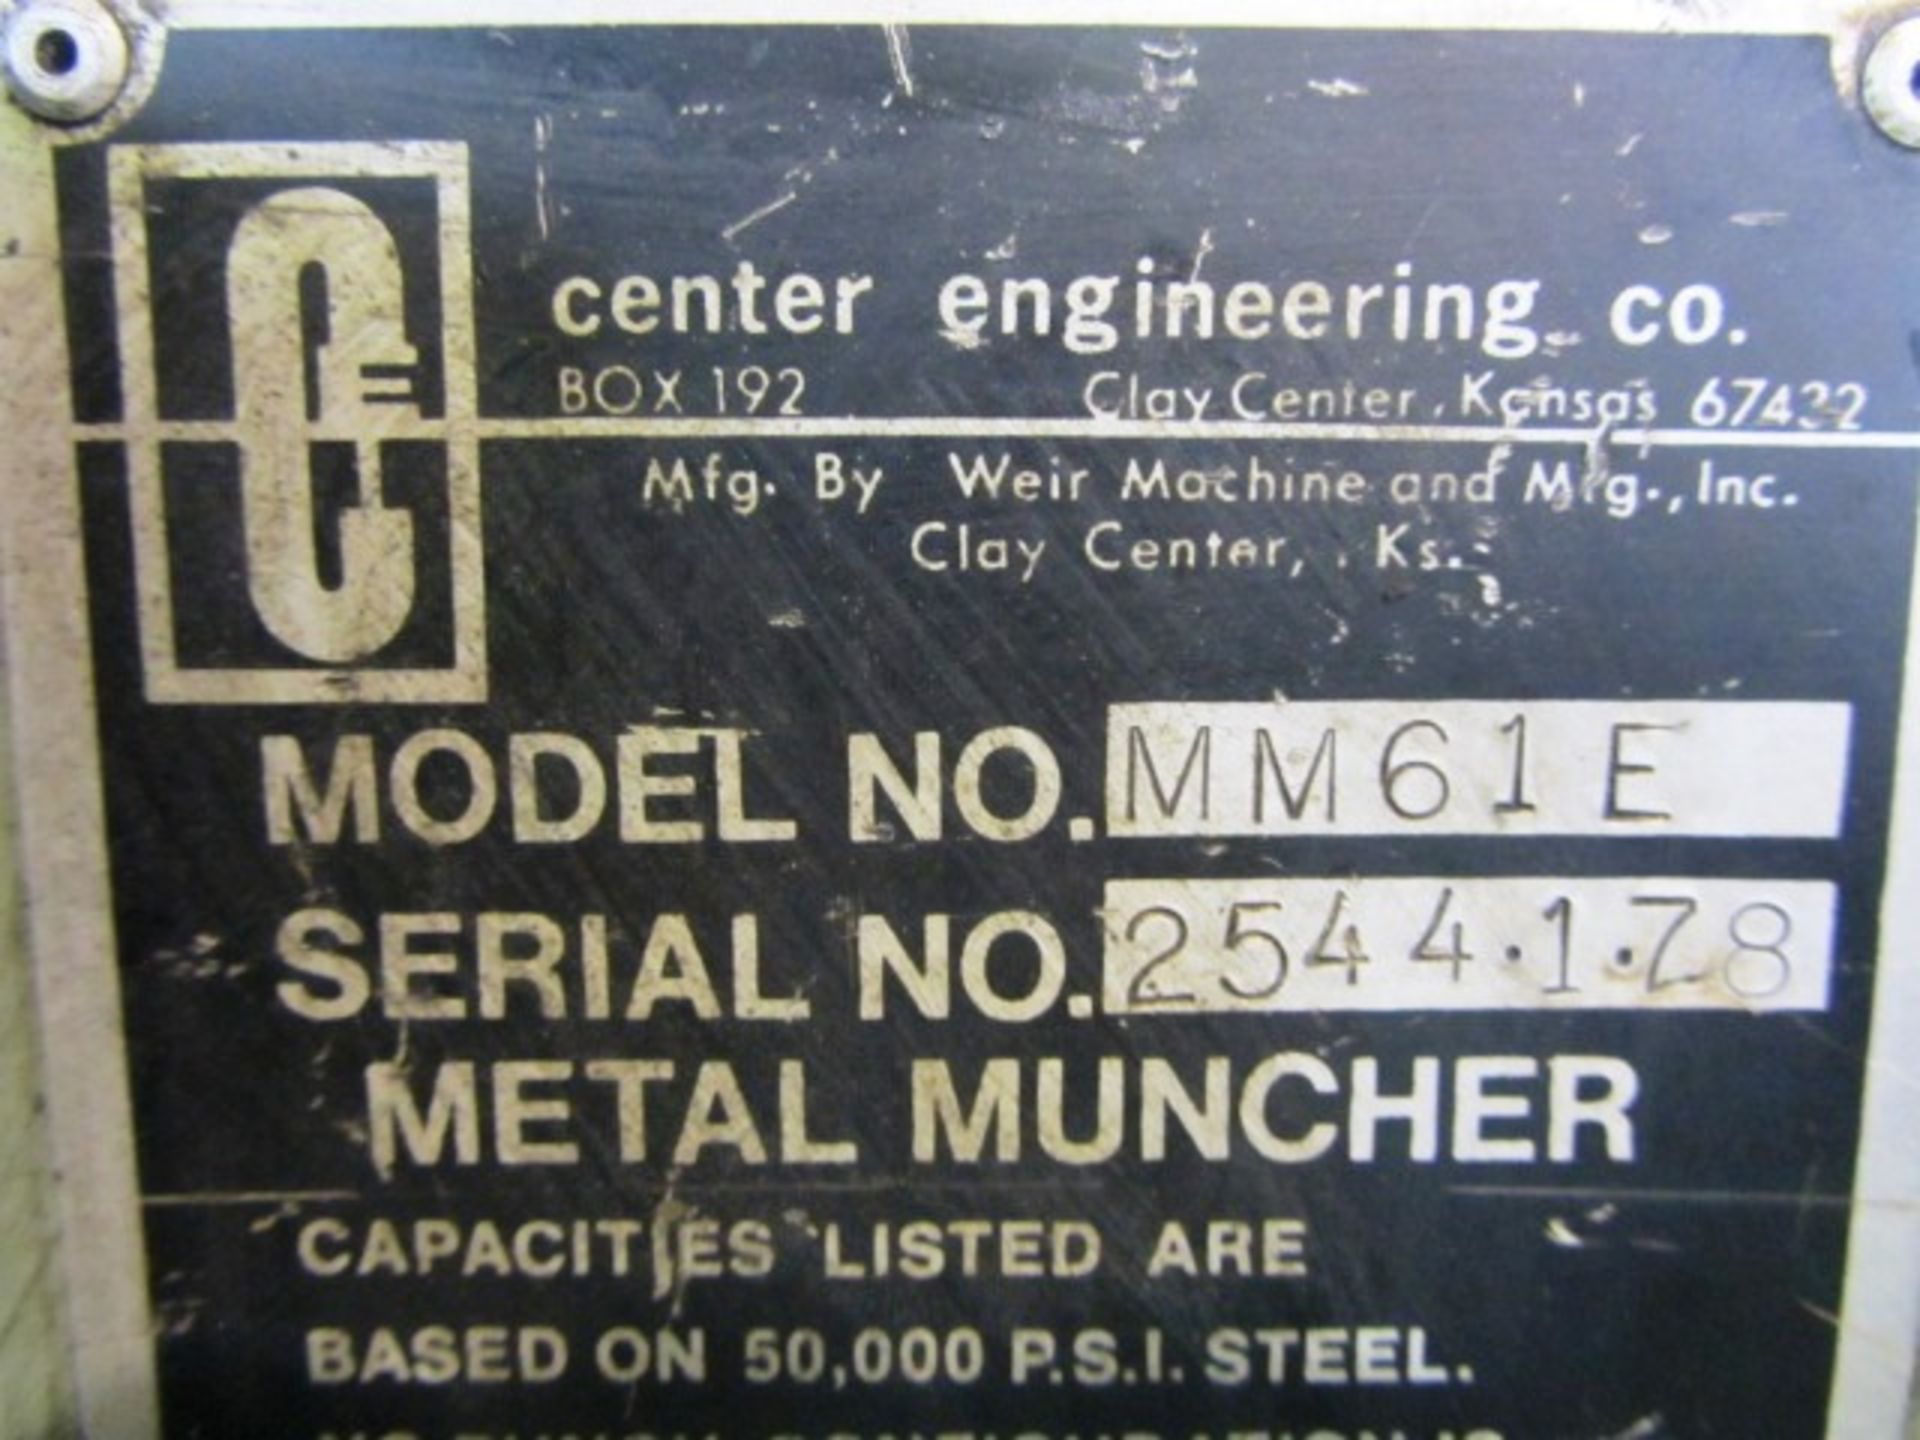 Metal Muncher Model MM61E 49 Ton Hydraulic Iron Worker with 3/4'' Punch, 12'' x 1/4'' Shear, 4'' x - Image 7 of 7